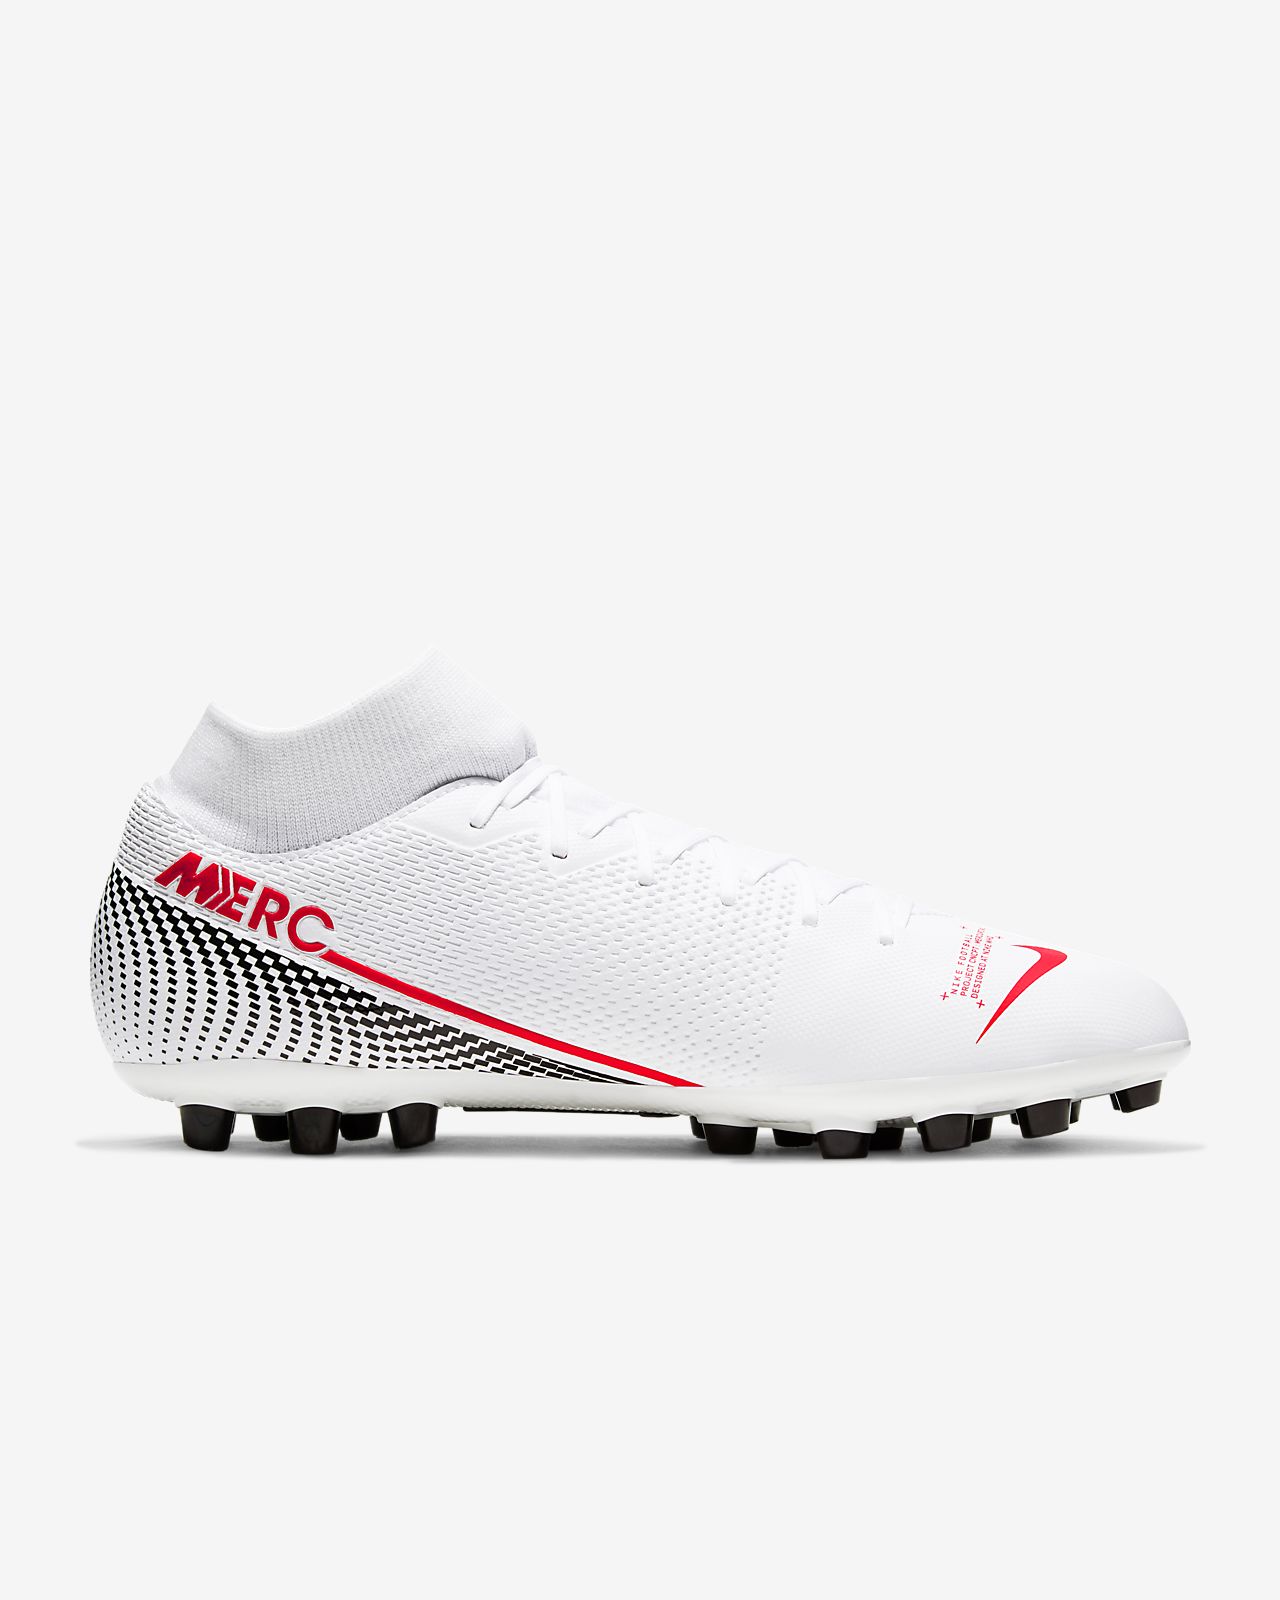 Nike Mercurial Superfly VI Academy MG AH7362 from 49.90.